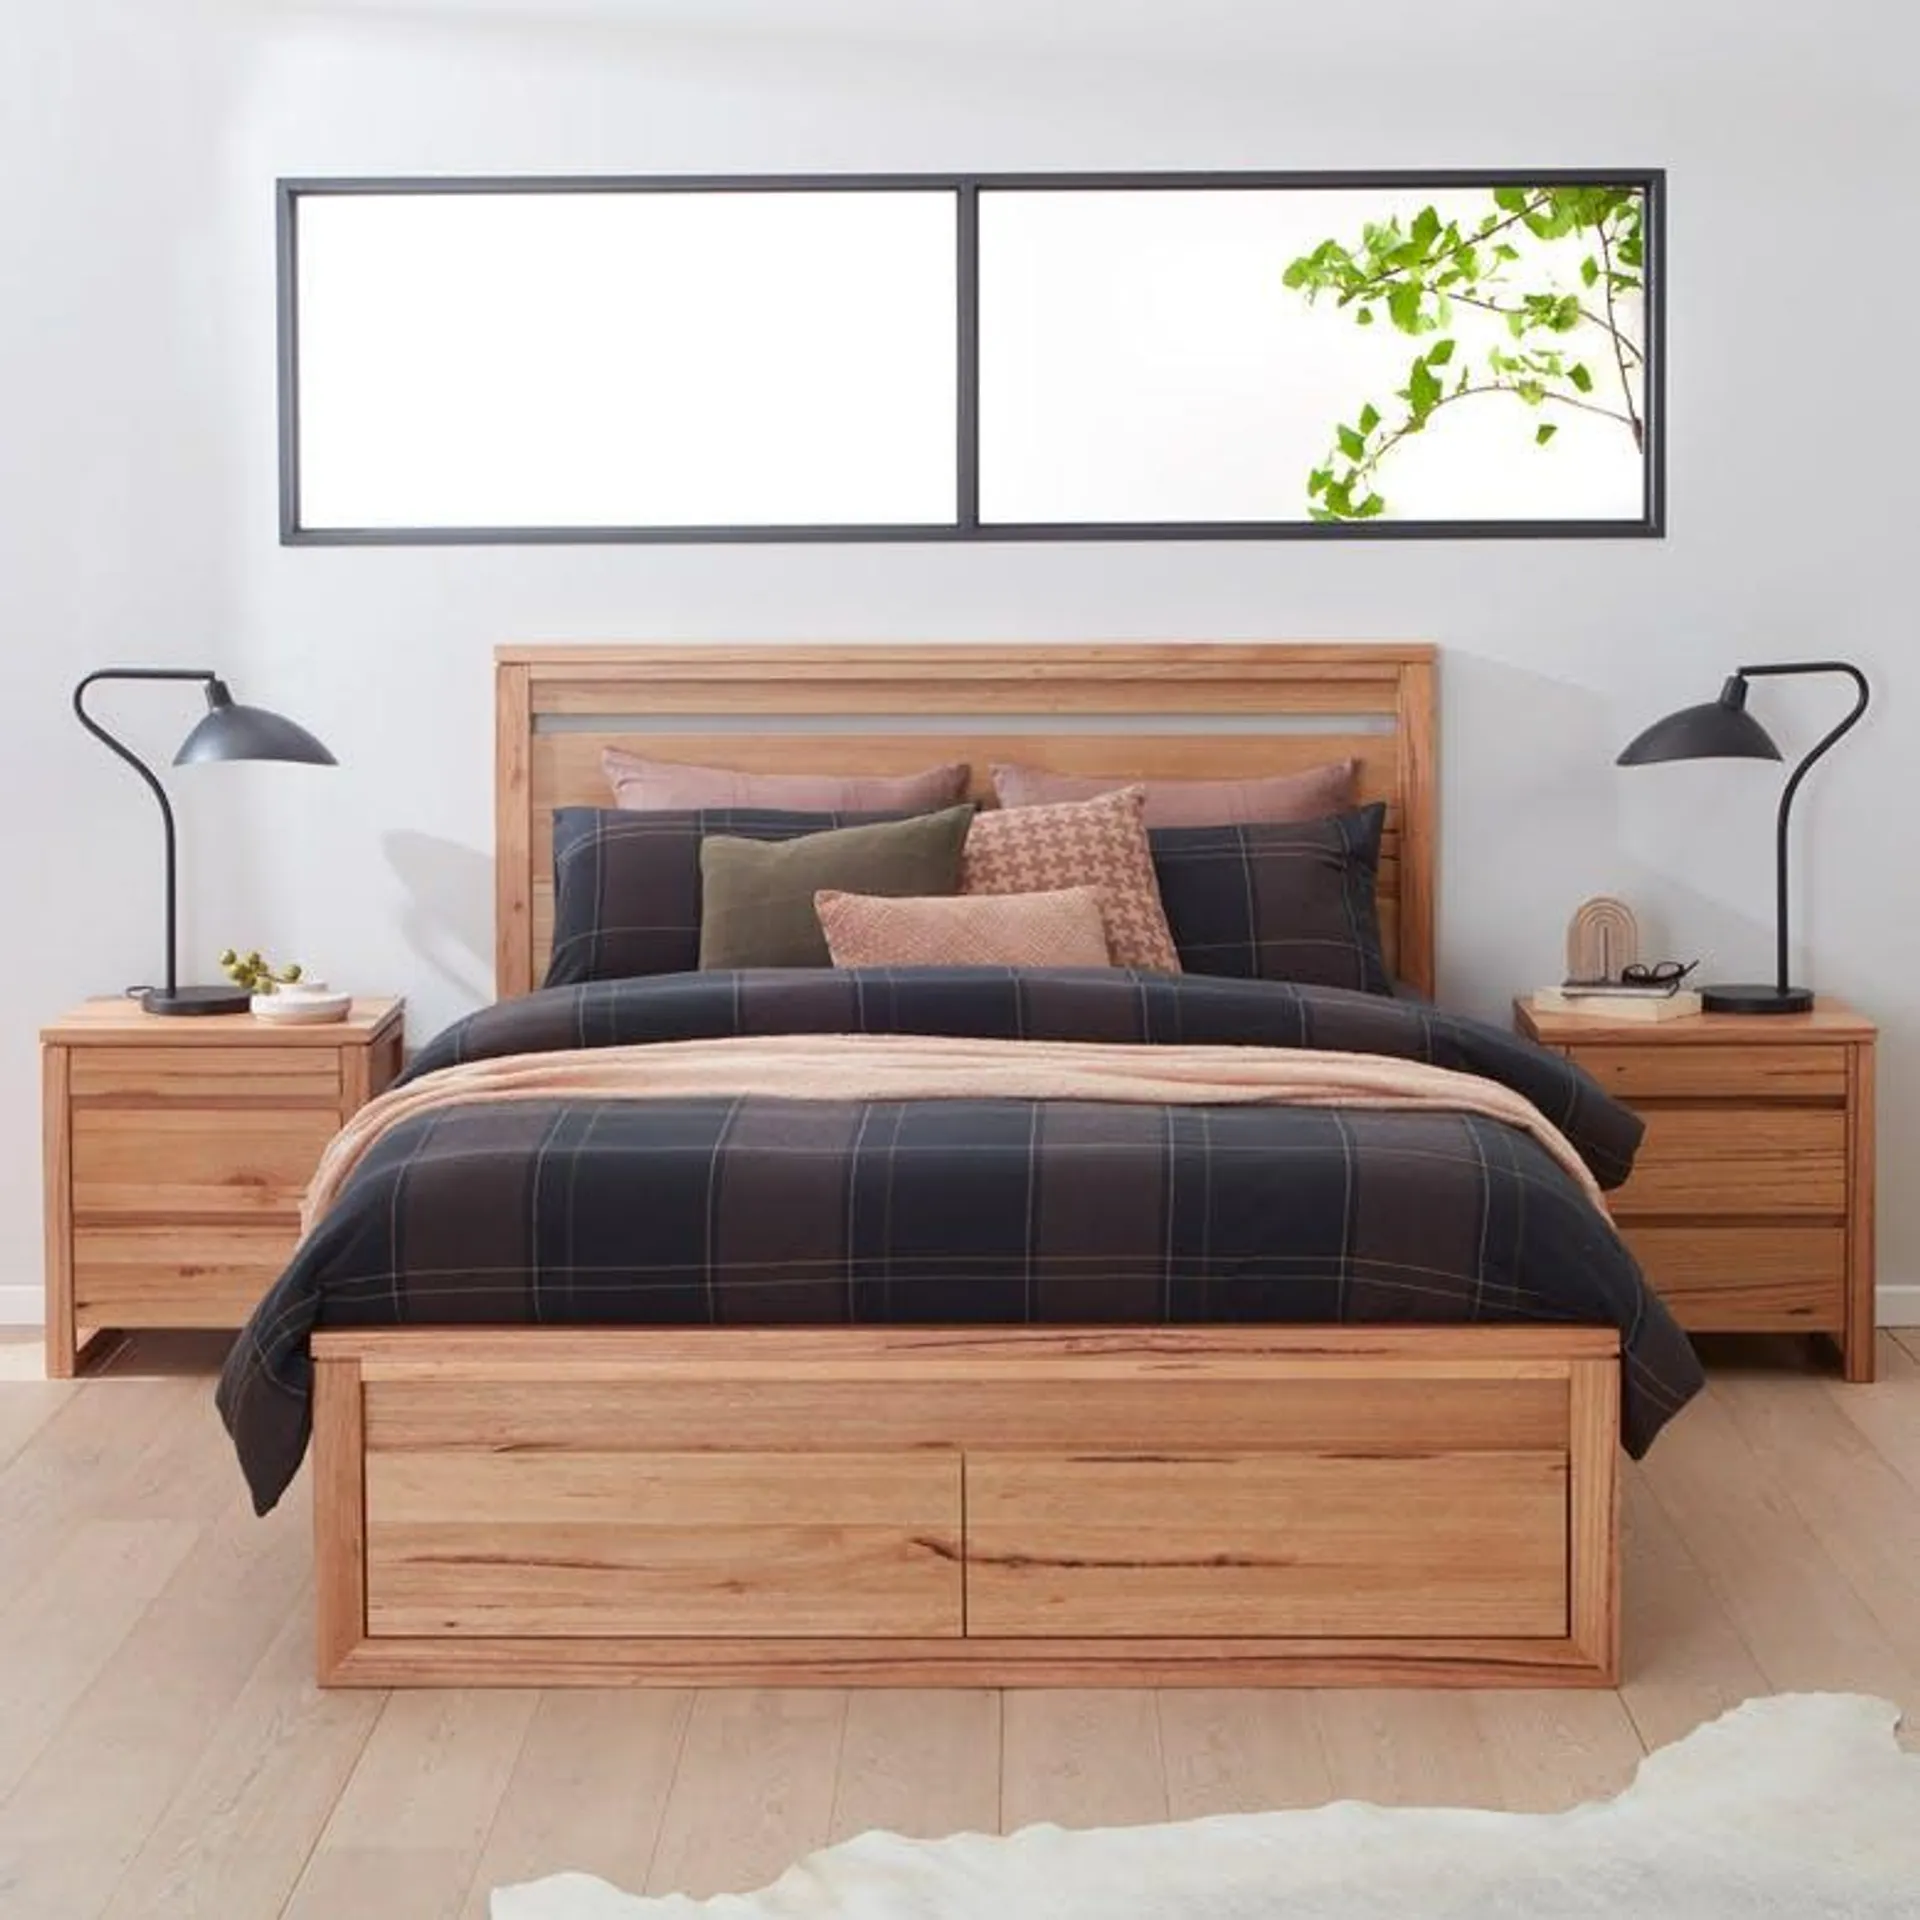 Stanley Bed Frame W/Drawers, Natural